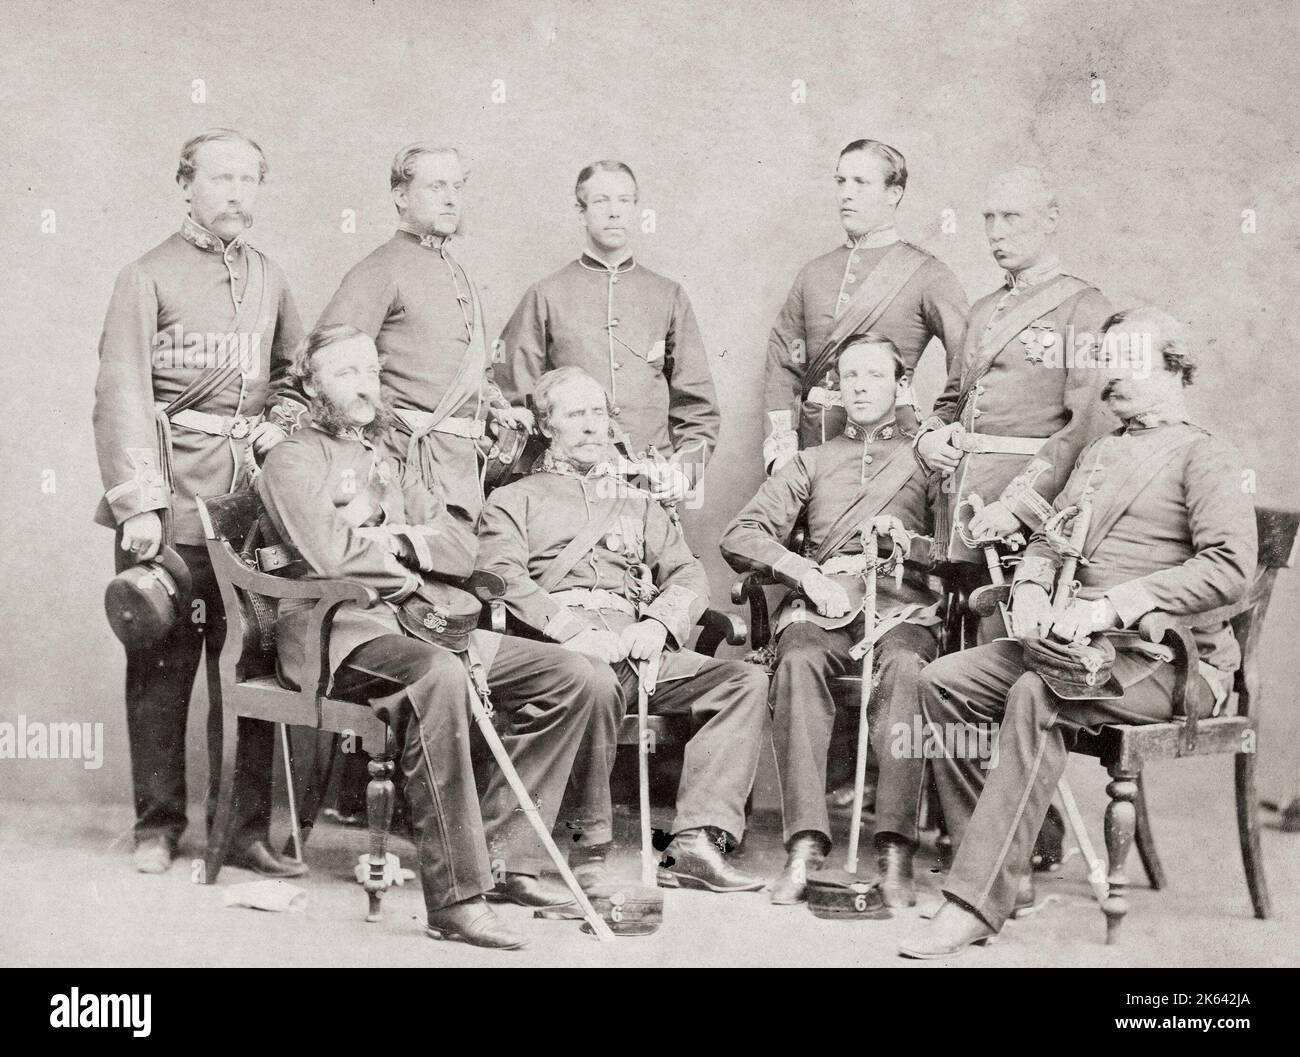 Vintage 19th century photograph - British army in India, 1860s - officers of the 6th Regiment Native Infantry 1864 Stock Photo